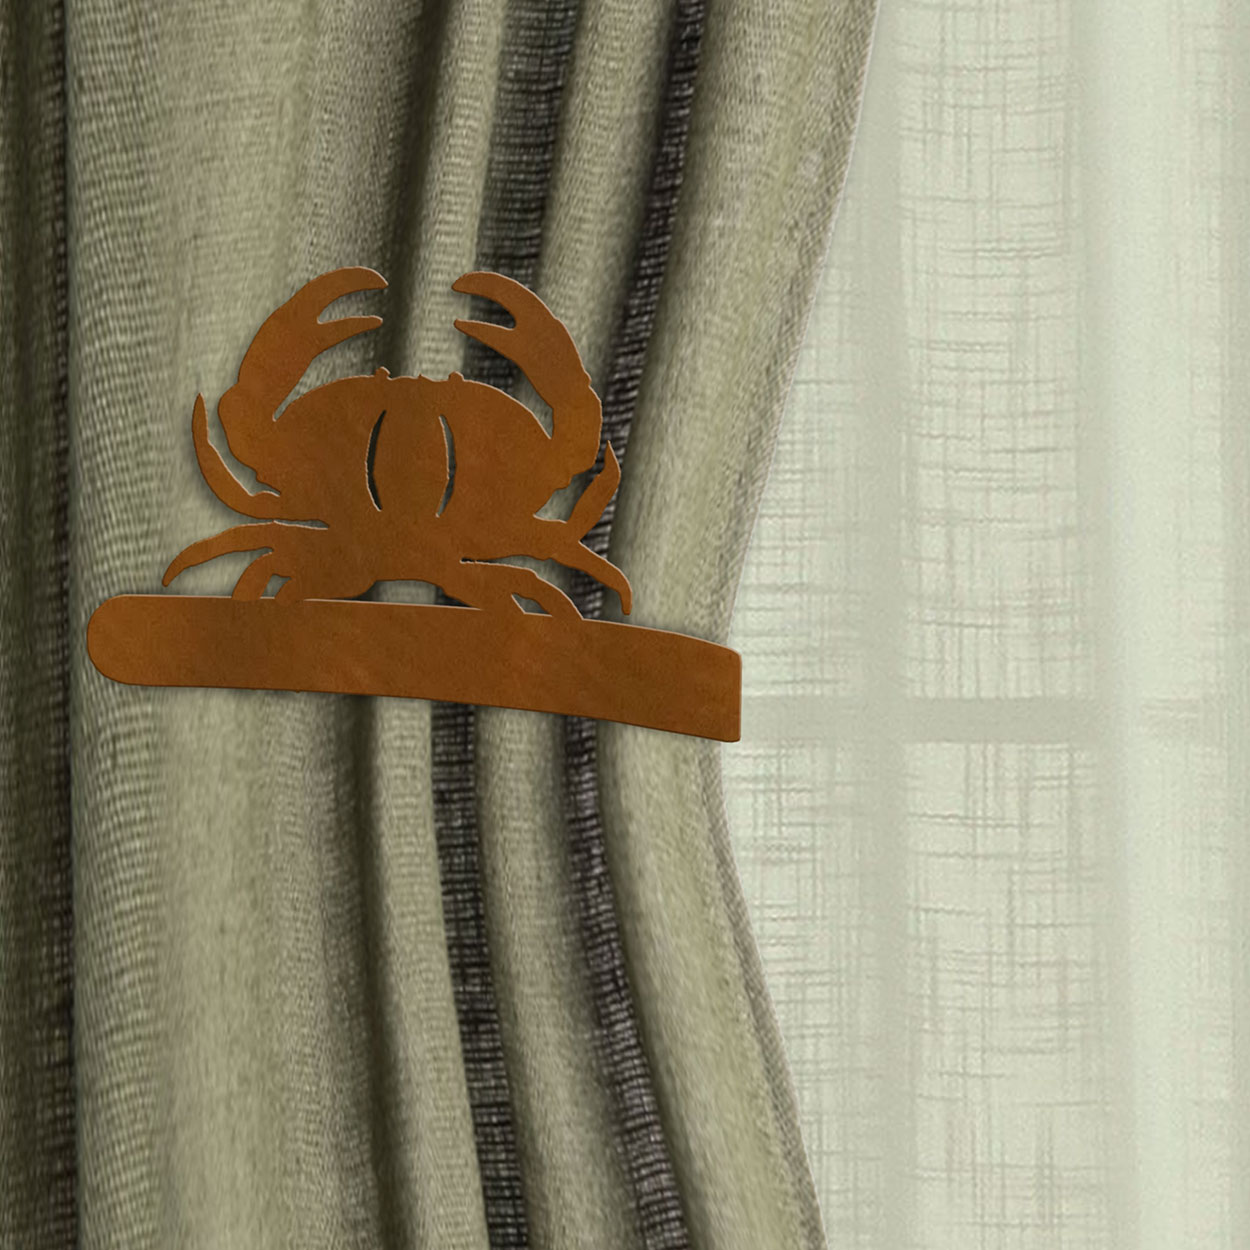 614511 - Drapery Tie Back Hook - Crab - Choose L or R and Color